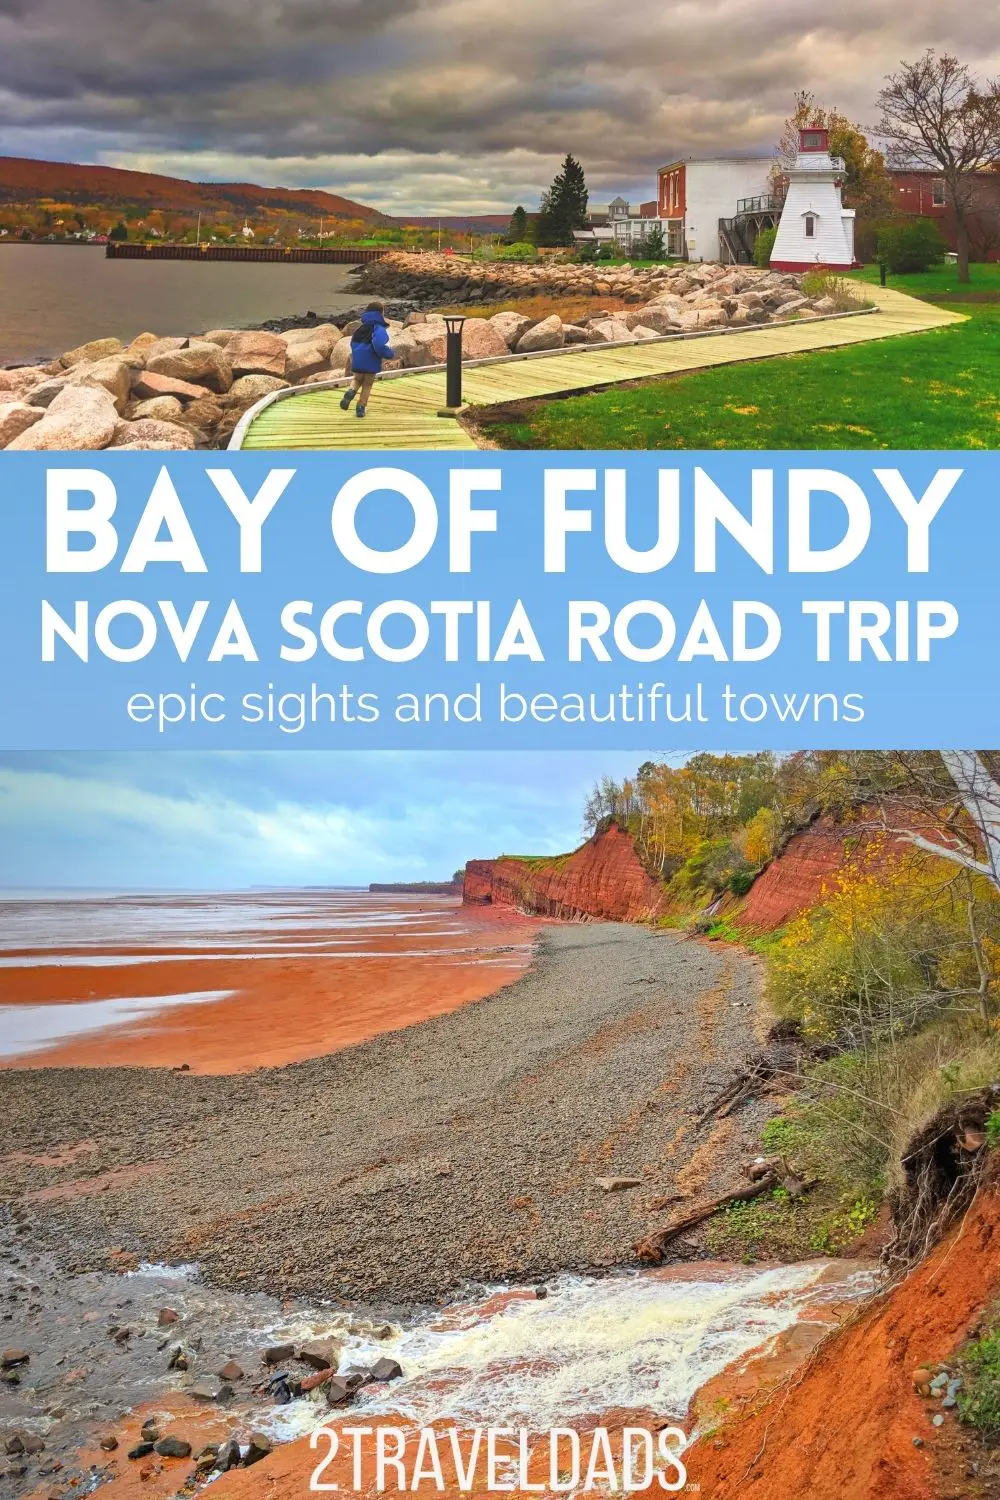 The northern shore of Nova Scotia is one of the most beautiful places we've traveled and it's perfect for a Nova Scotia road trip. The Bay of Fundy is home to both the most aggressive tides on earth and some of the epic sights. And the top pick for a lobster meal that you'd never expect...